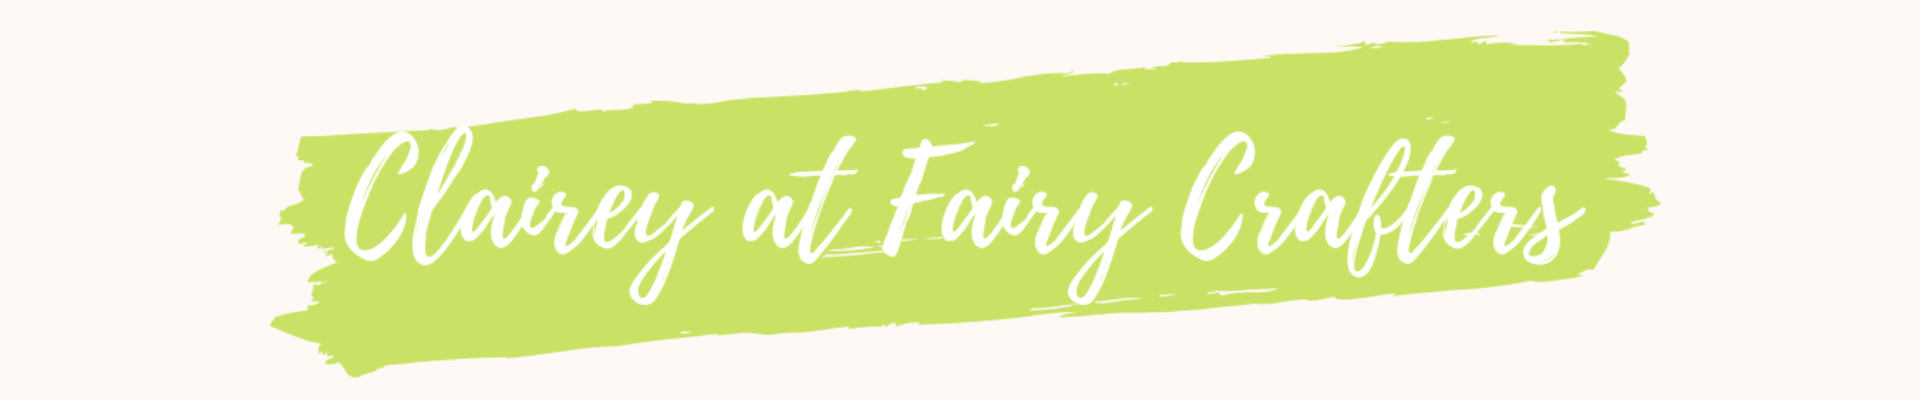 Clairey at Fairy Crafters